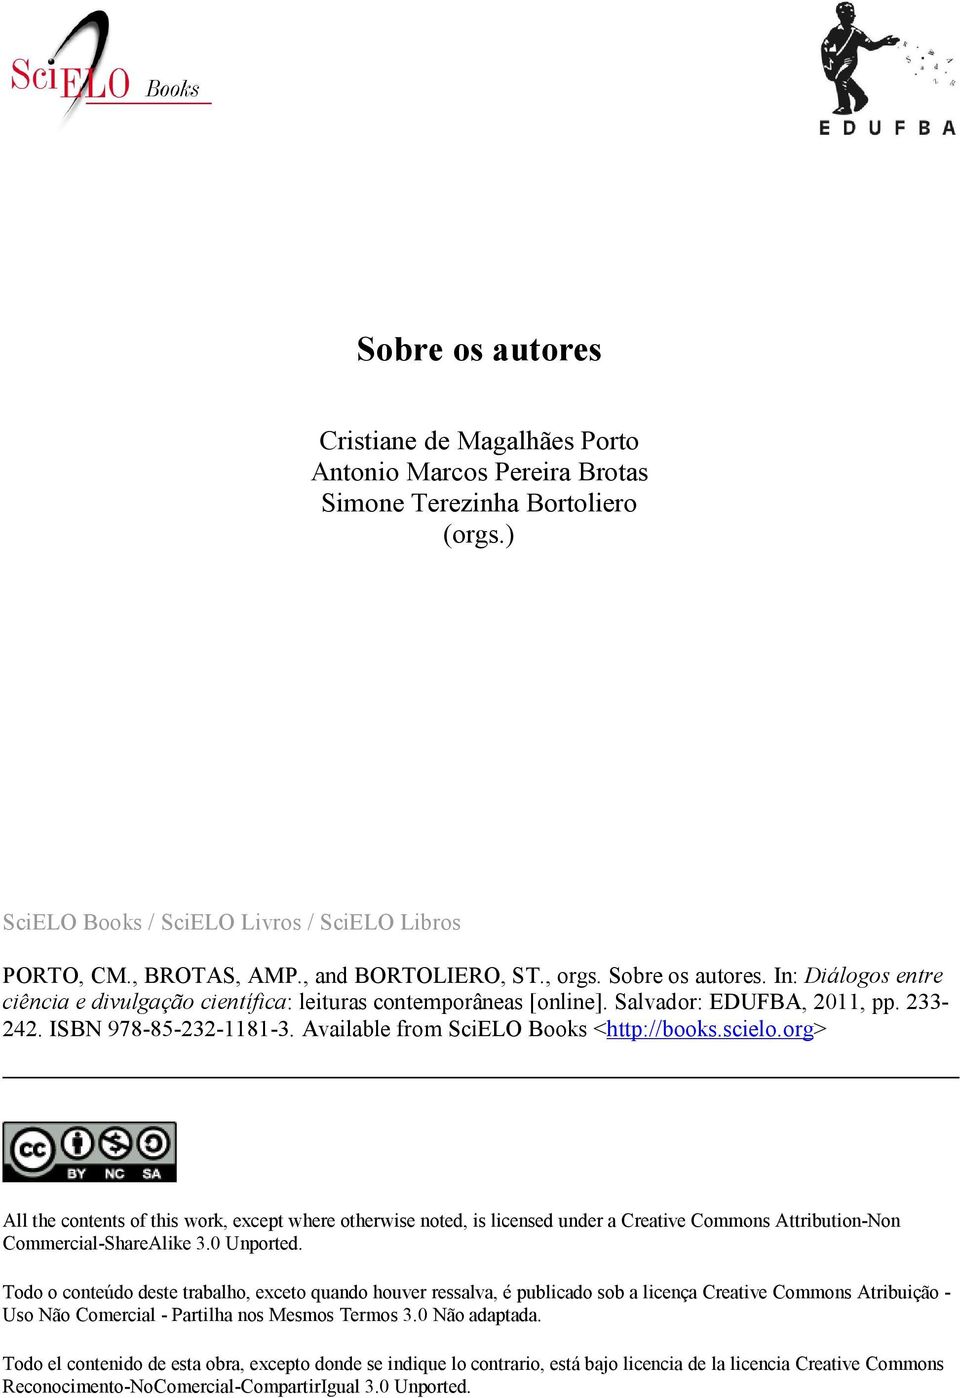 Available from SciELO Books <http://books.scielo.org> All the contents of this work, except where otherwise noted, is licensed under a Creative Commons Attribution-Non Commercial-ShareAlike 3.